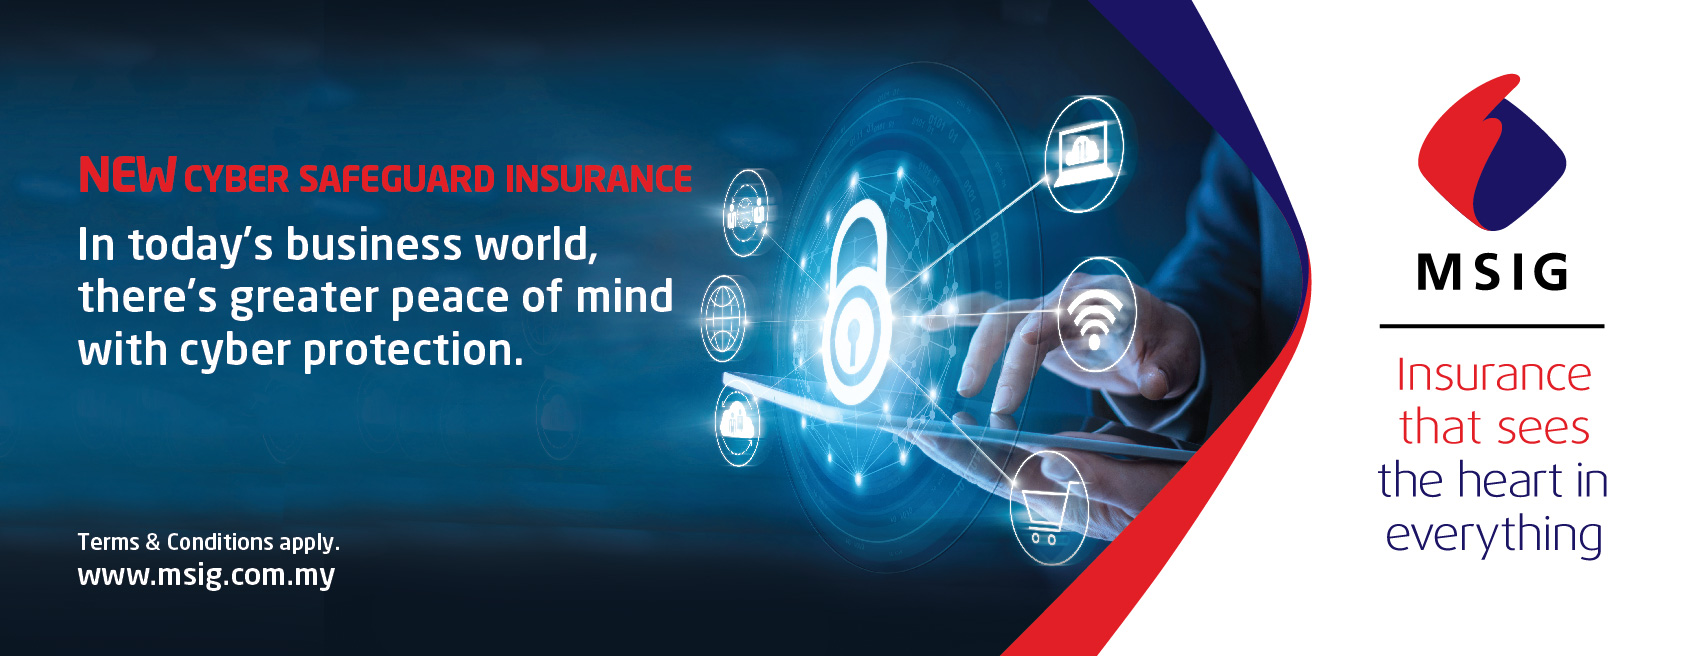 MSIG-Cyber SafeGuard Insurance